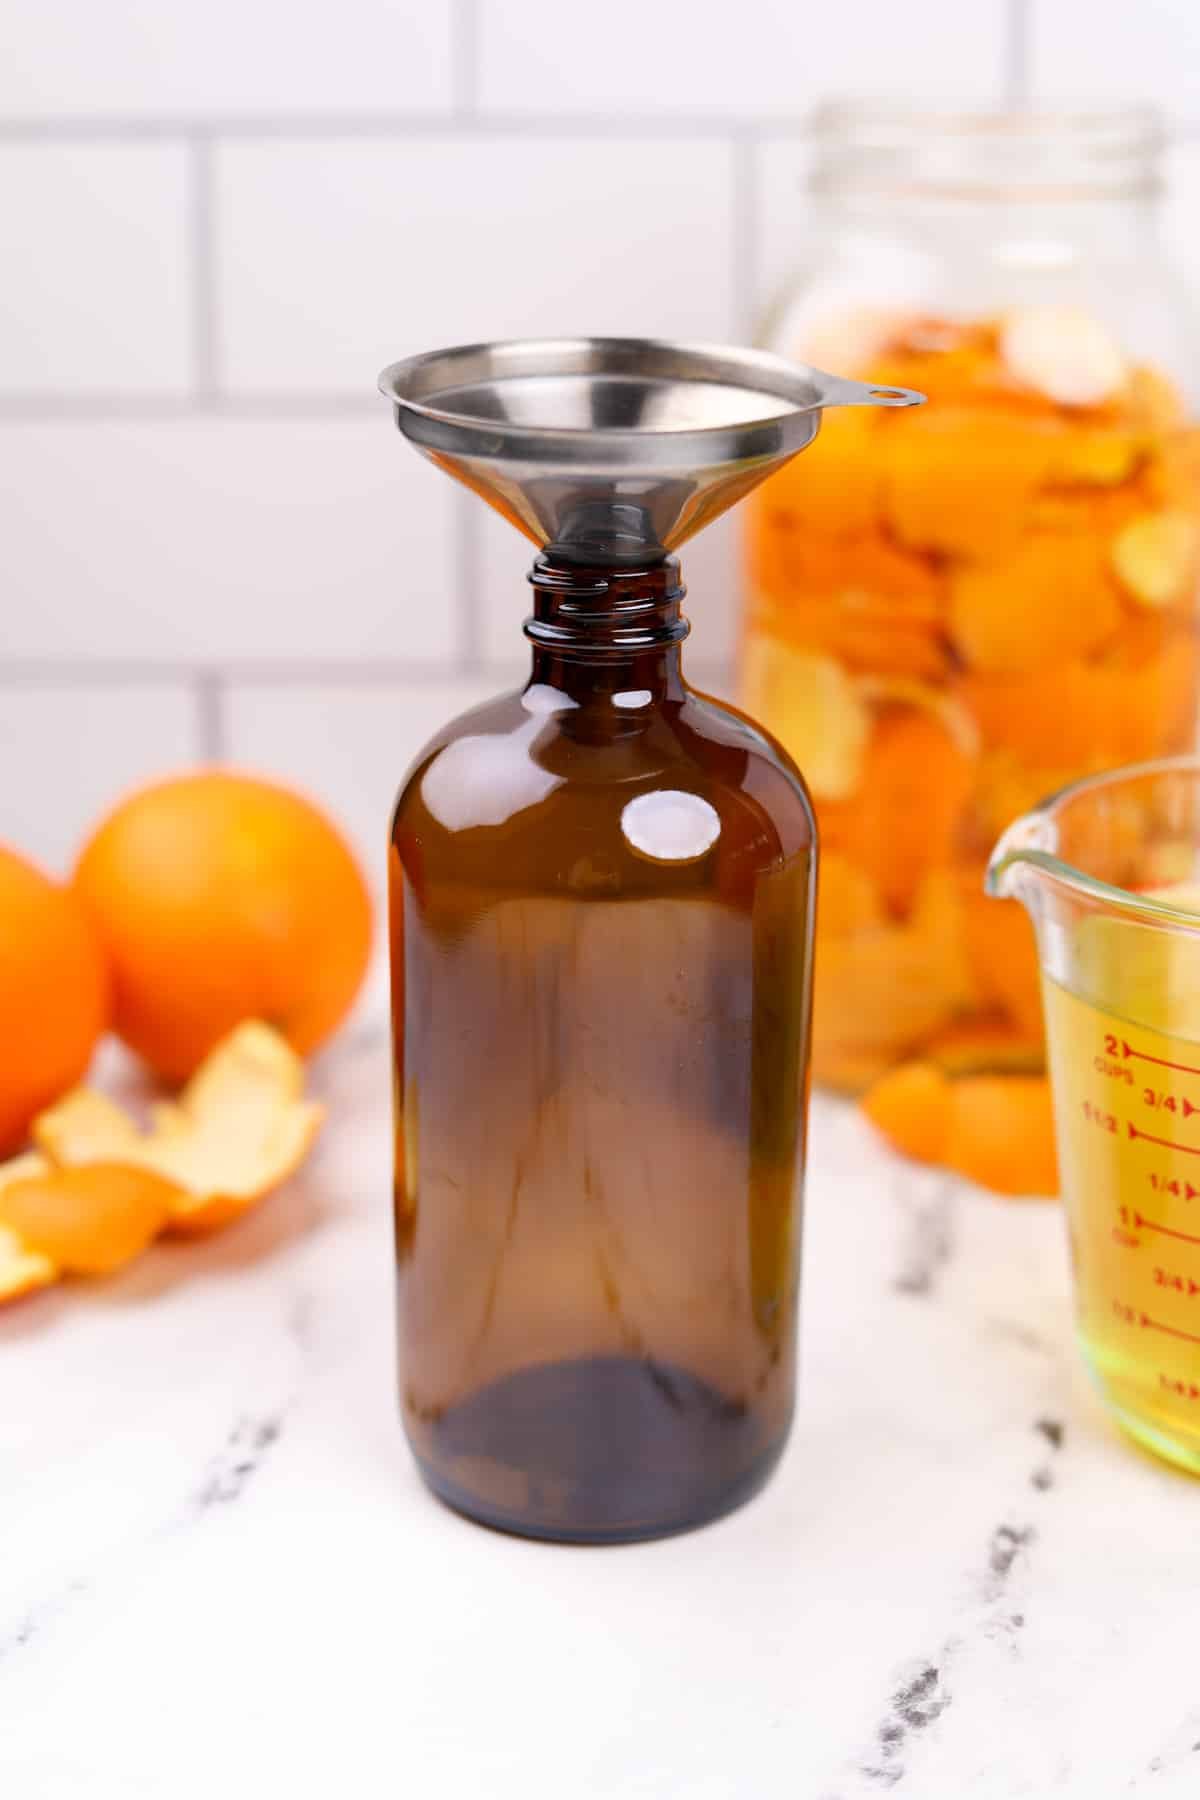 An amber glass bottle with a funnel fitted on the top.